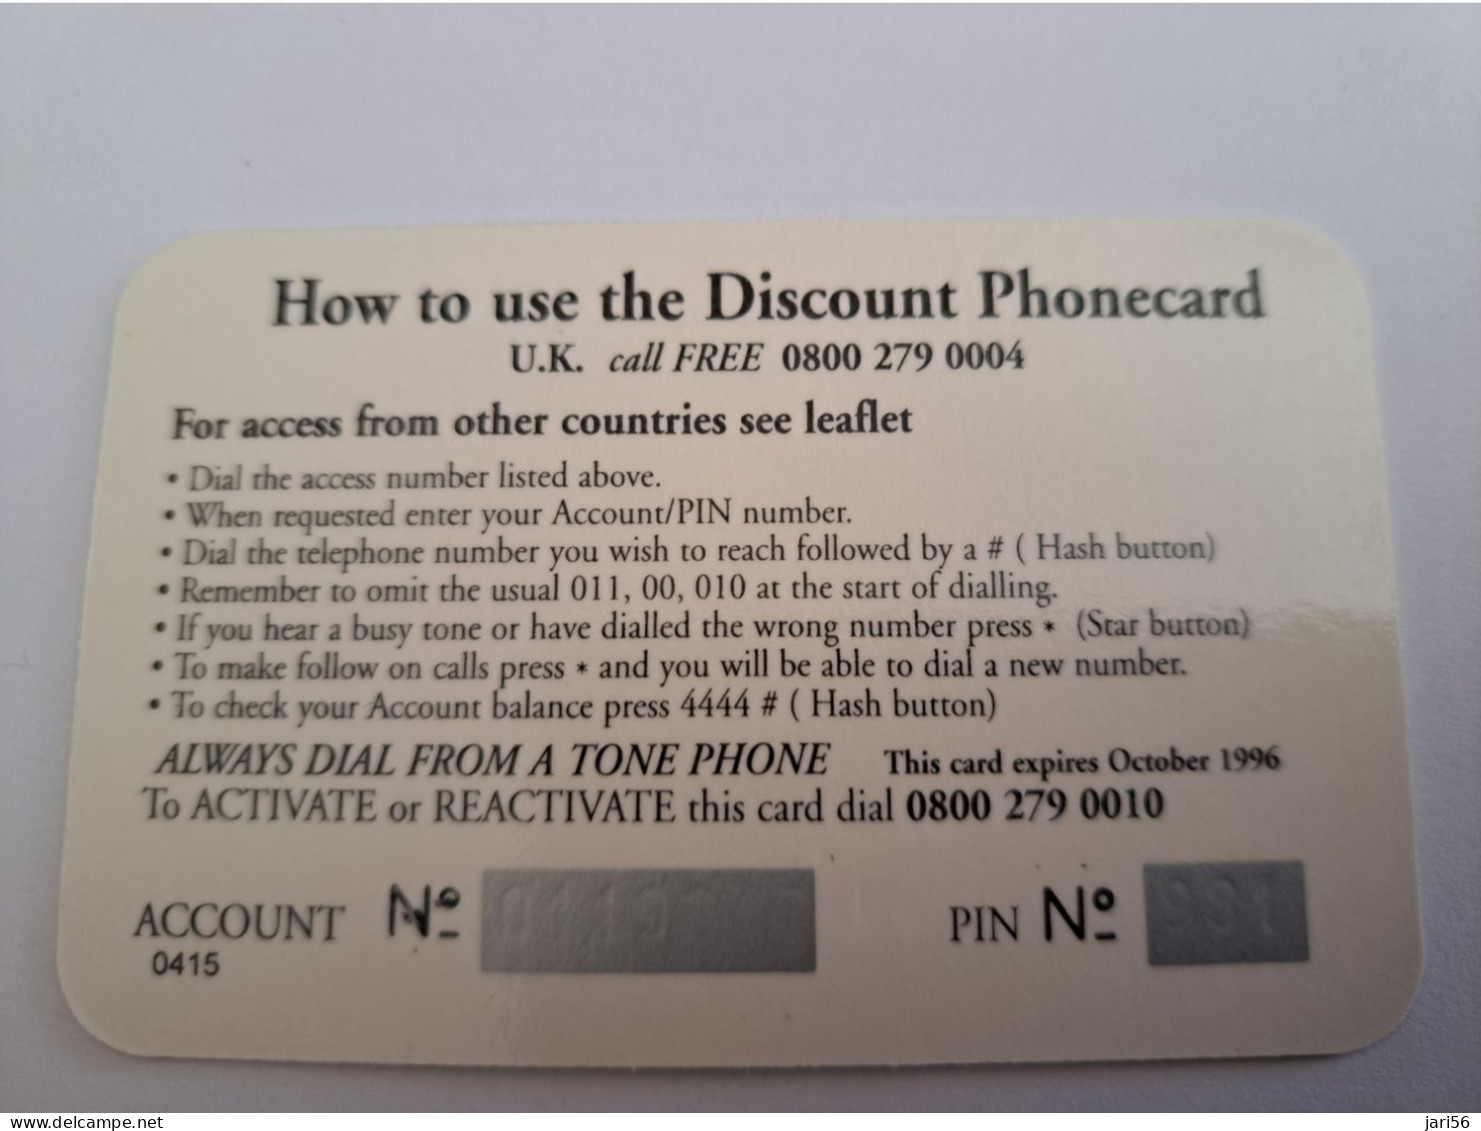 GREAT BRITAIN  / DISCOUNT PHONECARD/BUTTERFLY / 75 PENCE    PREPAID CARD / MINT      **13588** - Verzamelingen